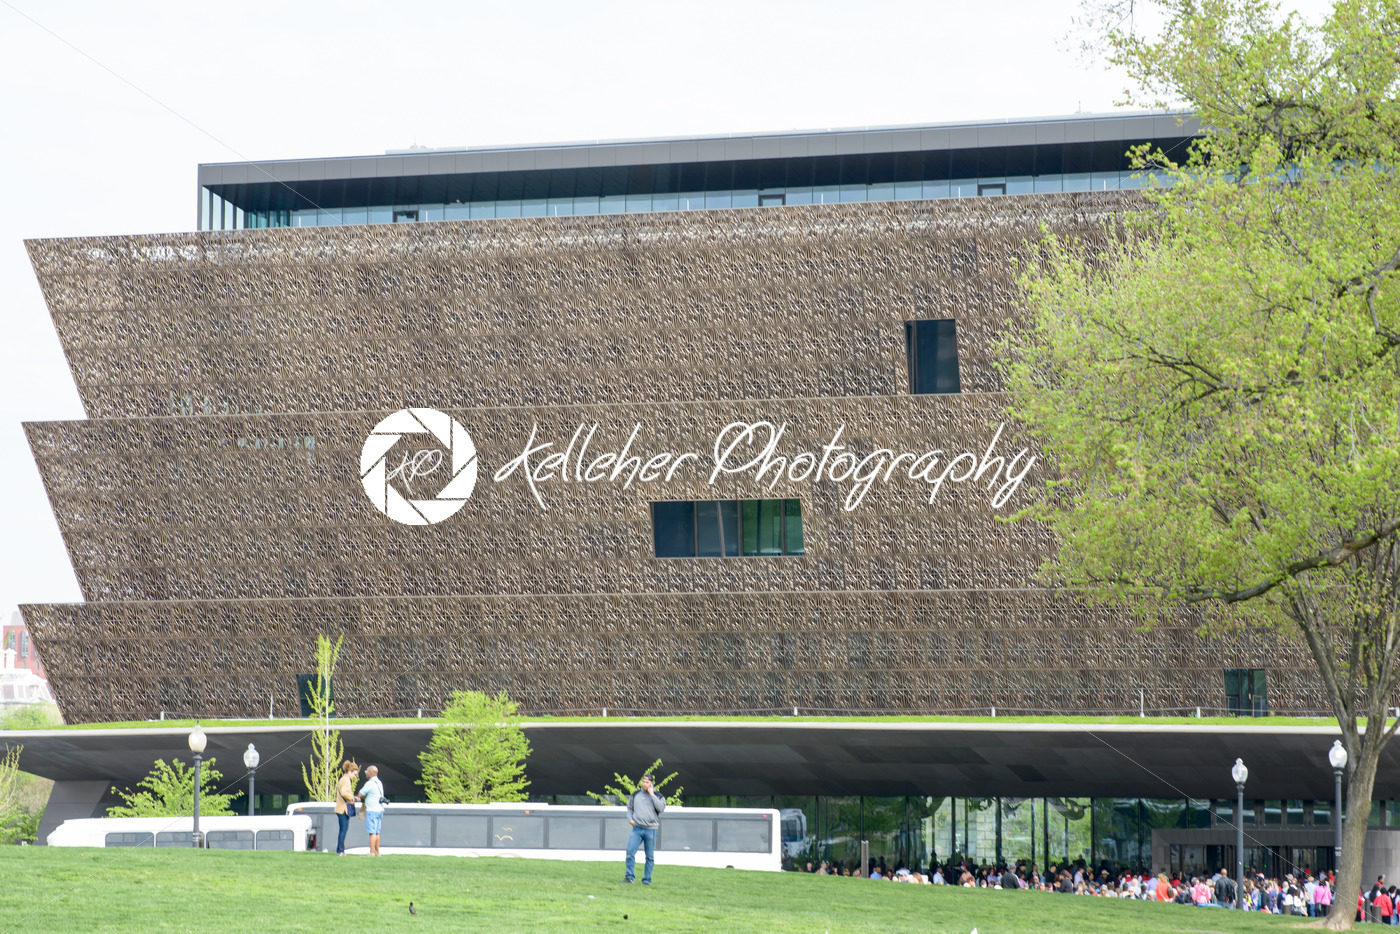 WASHINGTON, DISTRICT OF COLUMBIA – APRIL 14: Smithsonian National Museum of African American History on April 14, 2017 - Kelleher Photography Store